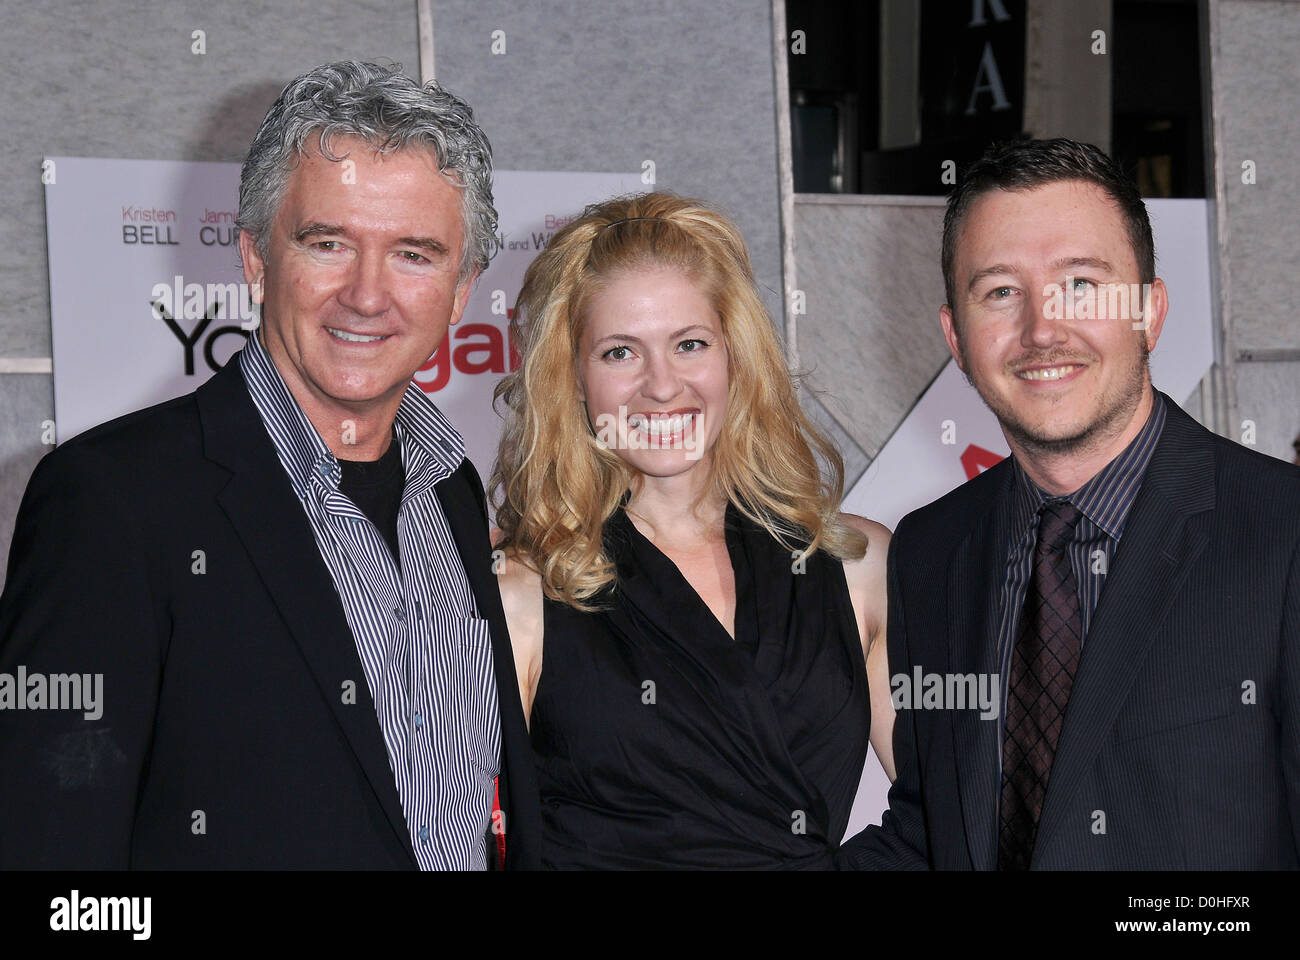 anekdote Moderat sjældenhed Patrick Duffy with his son Padraic Duffy and guest Los Angeles Premiere of  "You Again" held at the El Capitan Theatre Stock Photo - Alamy